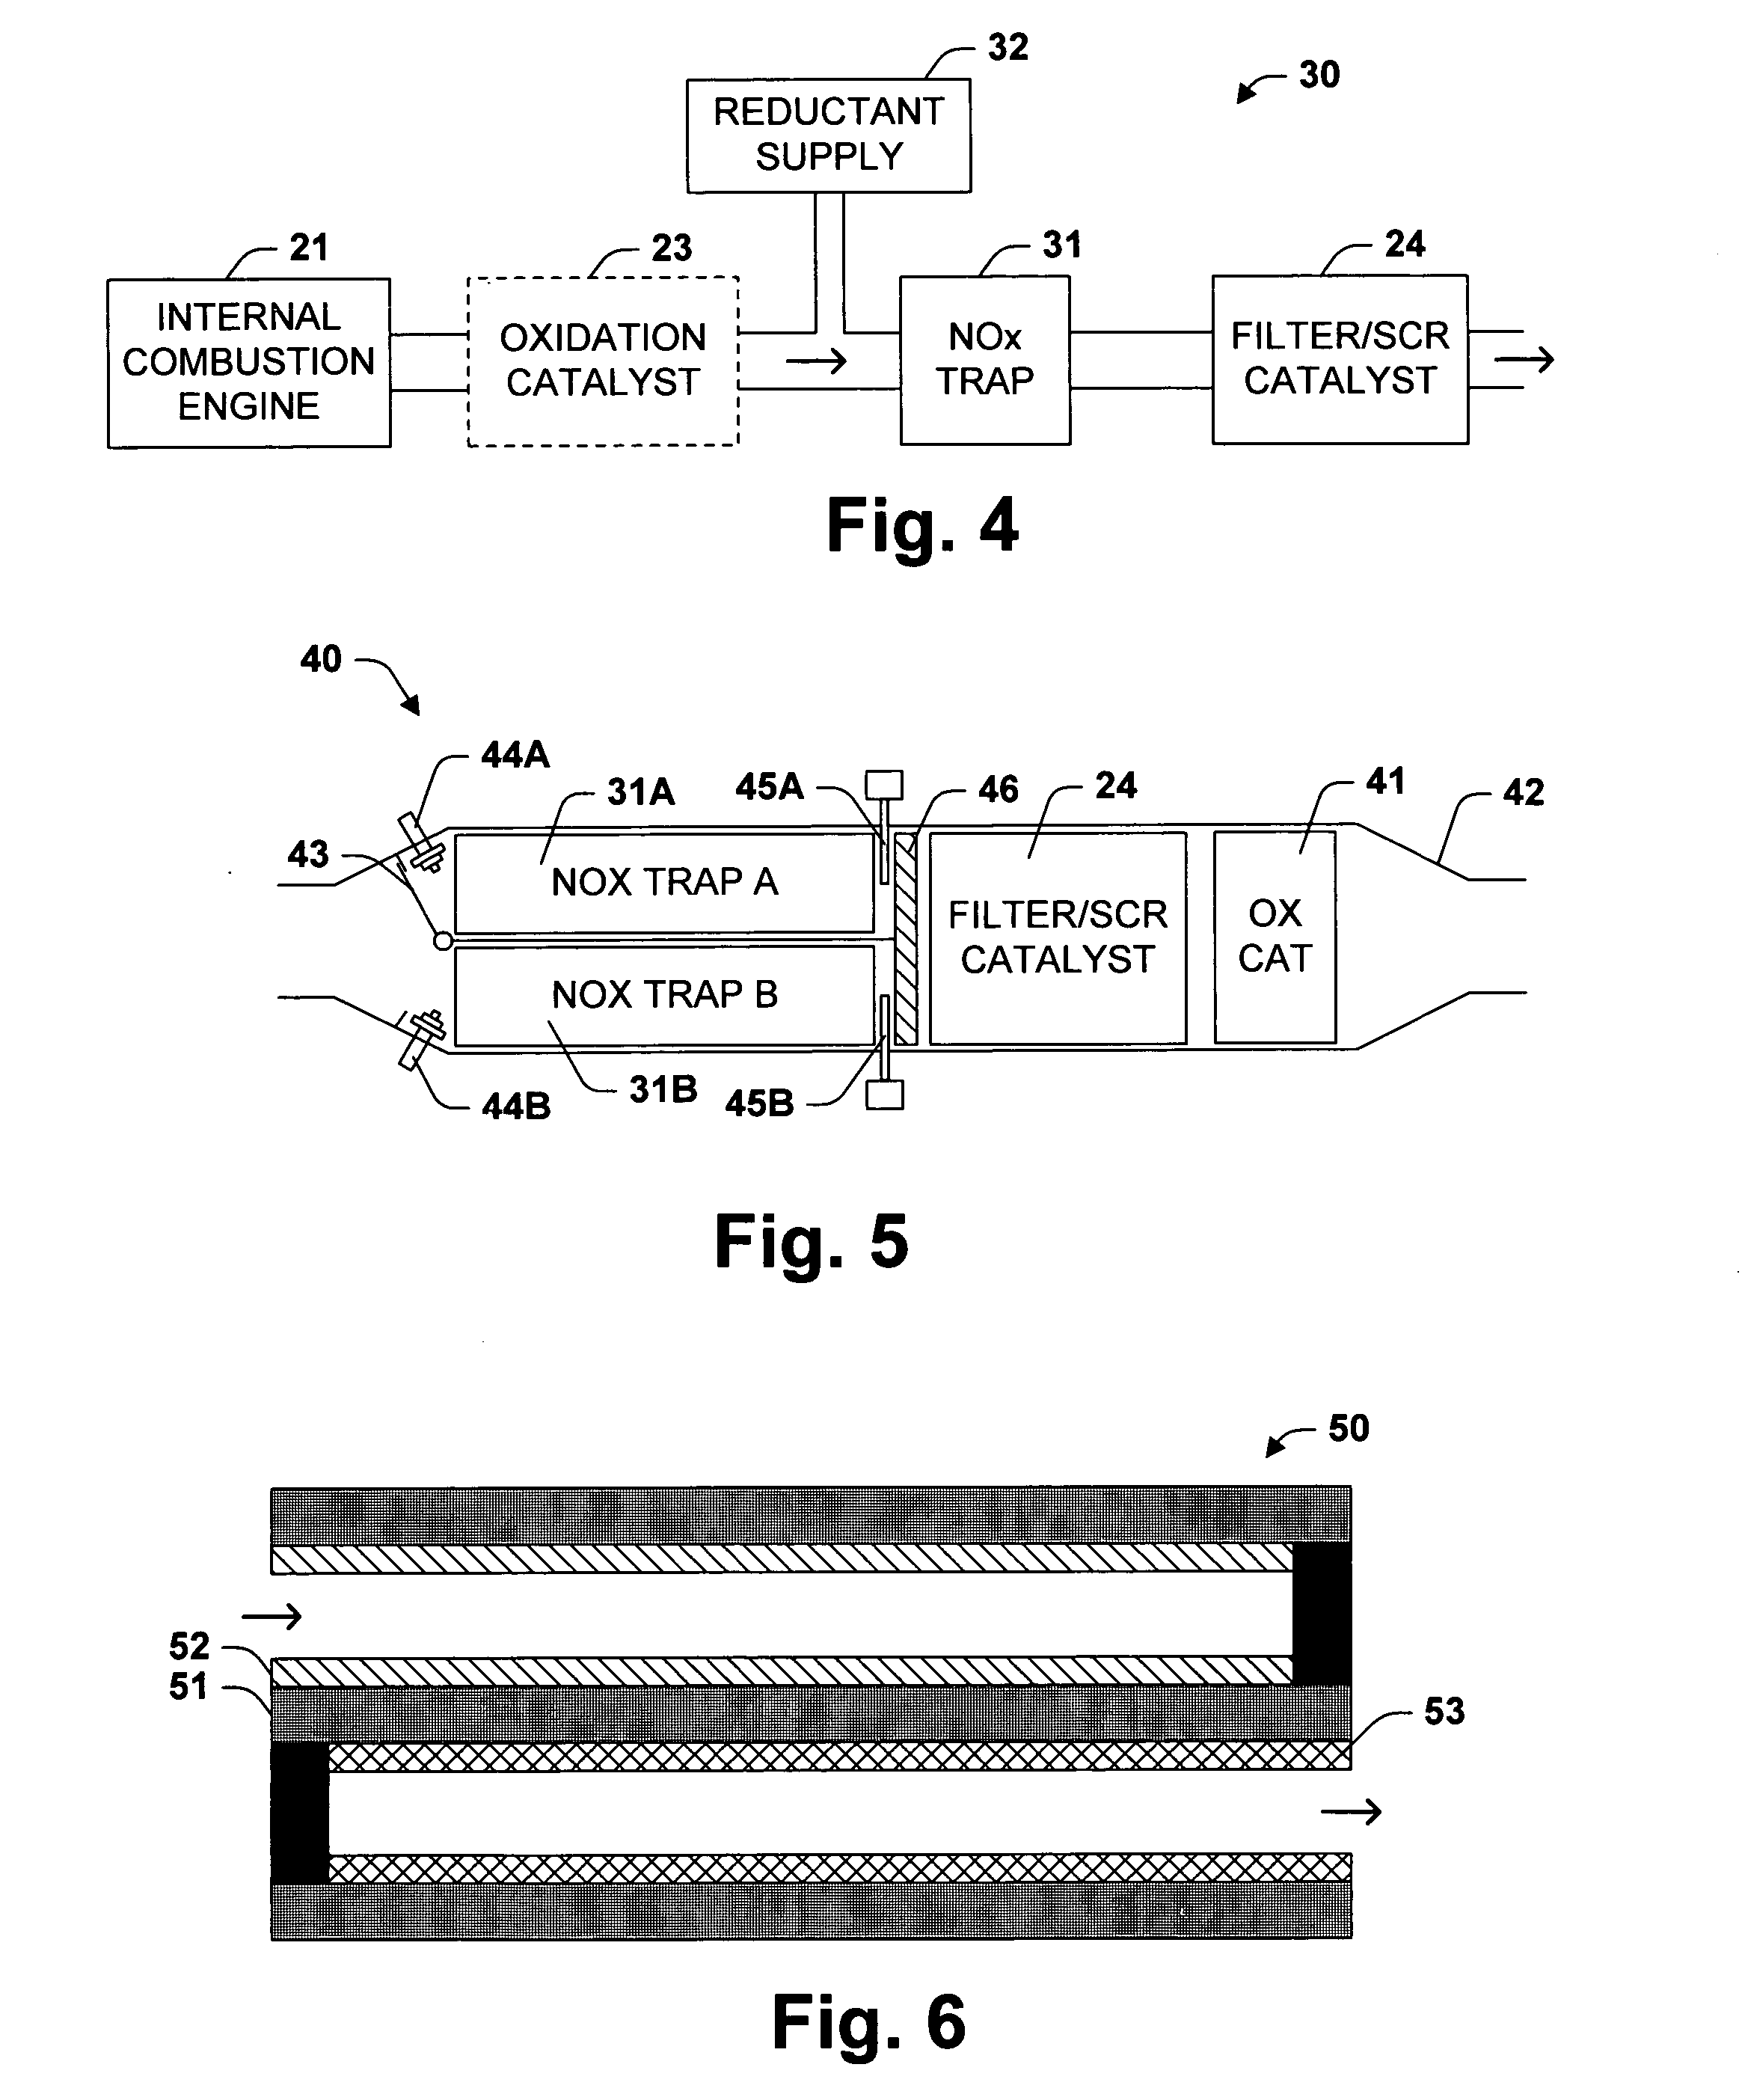 Integrated NOx and PM reduction devices for the treatment of emissions from internal combustion engines